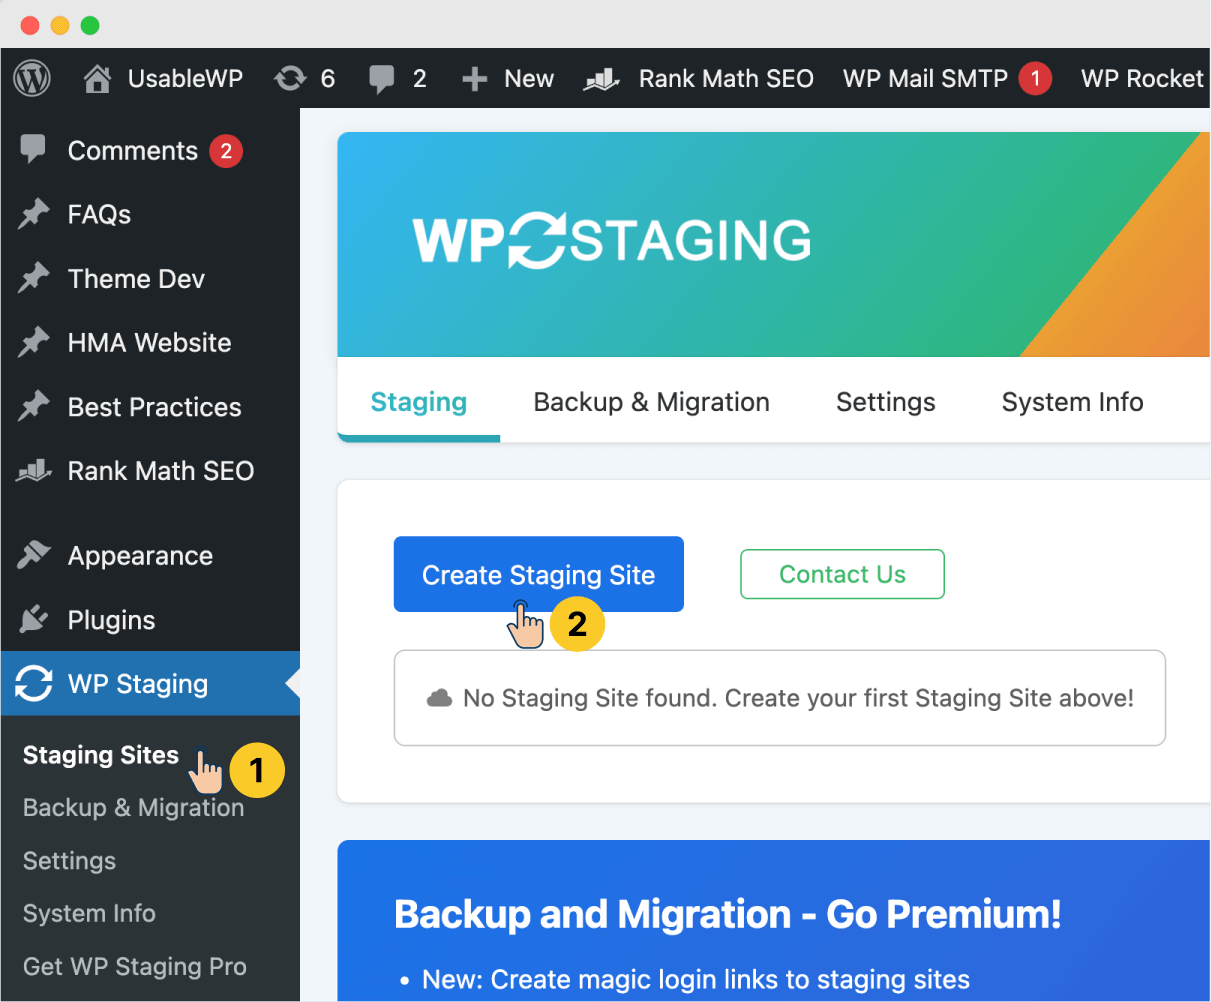 Button for creating the staging site